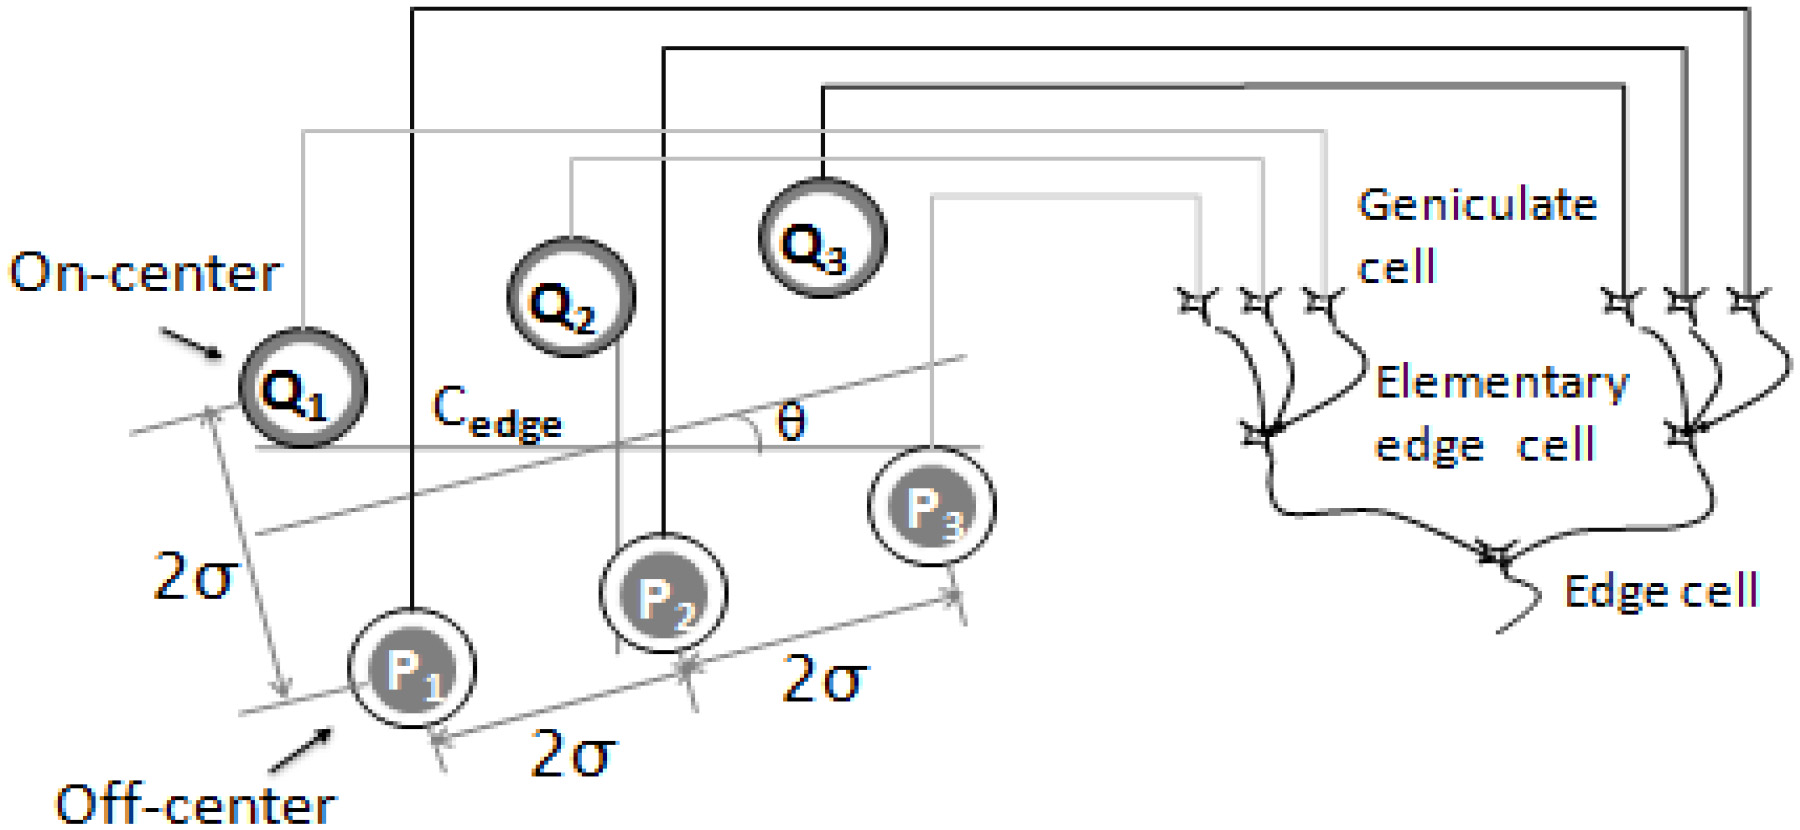 Wiring diagram of an edge cell. A hierarchical structure was introduced by Hubel and Wiesel in order to explain how cortical receptive fields are built up; this hierarchy is made up of simple cells, complex cells and hyper complex cells. Elementary units are used to build up receptive fields of simple cells, termed elementary edge cells; these receive projections from three geniculate cells. An edge cell received projections from the two types of elementary edge cell. Cedge and denoted the center position and orientation of the edge cell, respectively. Pi and Qi (i= 1, 2, 3) indicated the center positions of the receptive fields of OFF-center geniculate cells and ON-center ones, respectively.